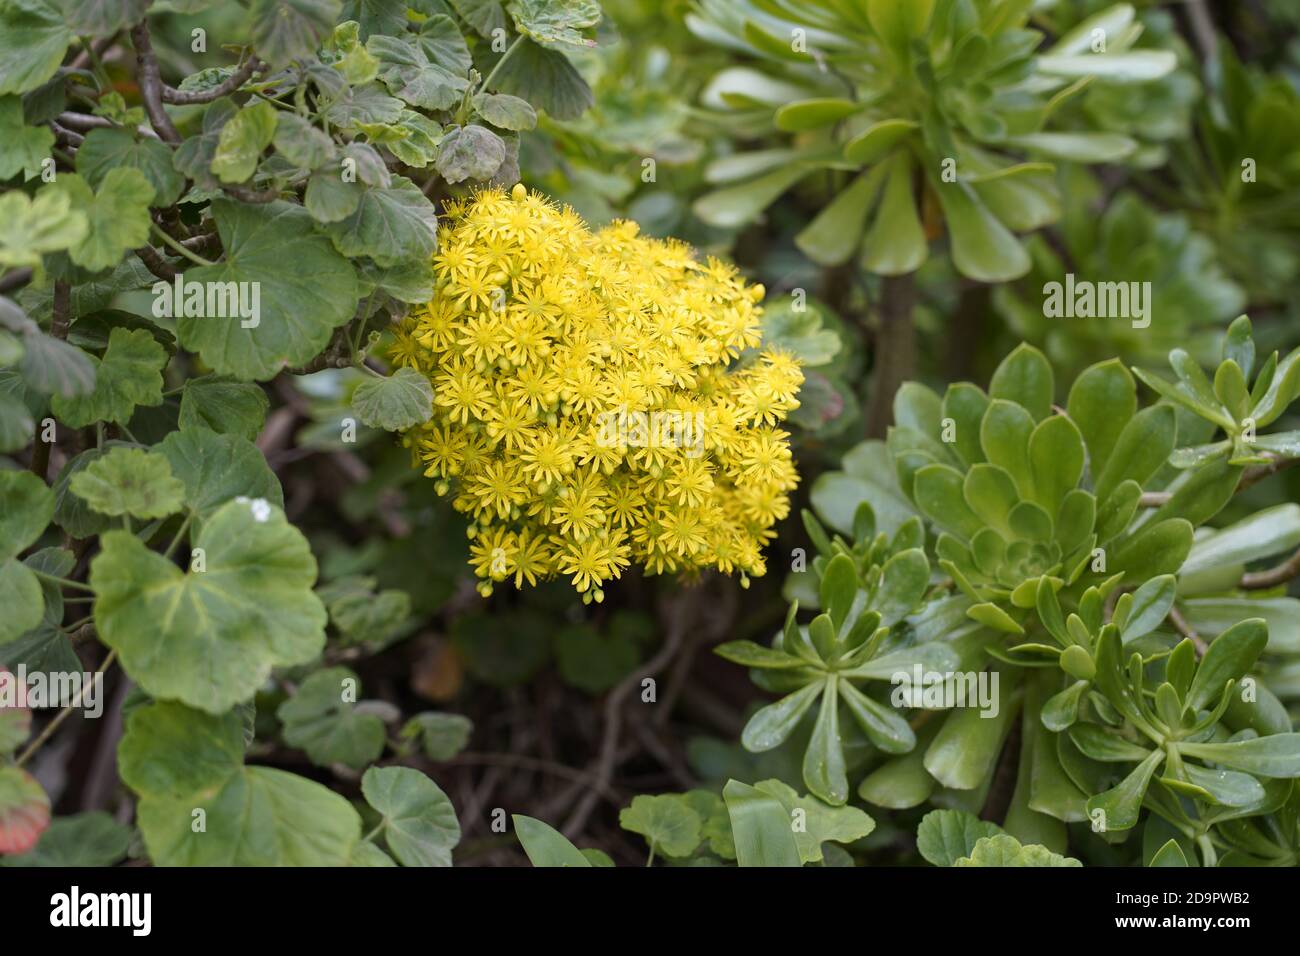 Bright yellow native Australian Everlastings or Paper Daisies surrounded by deep green foliage Stock Photo